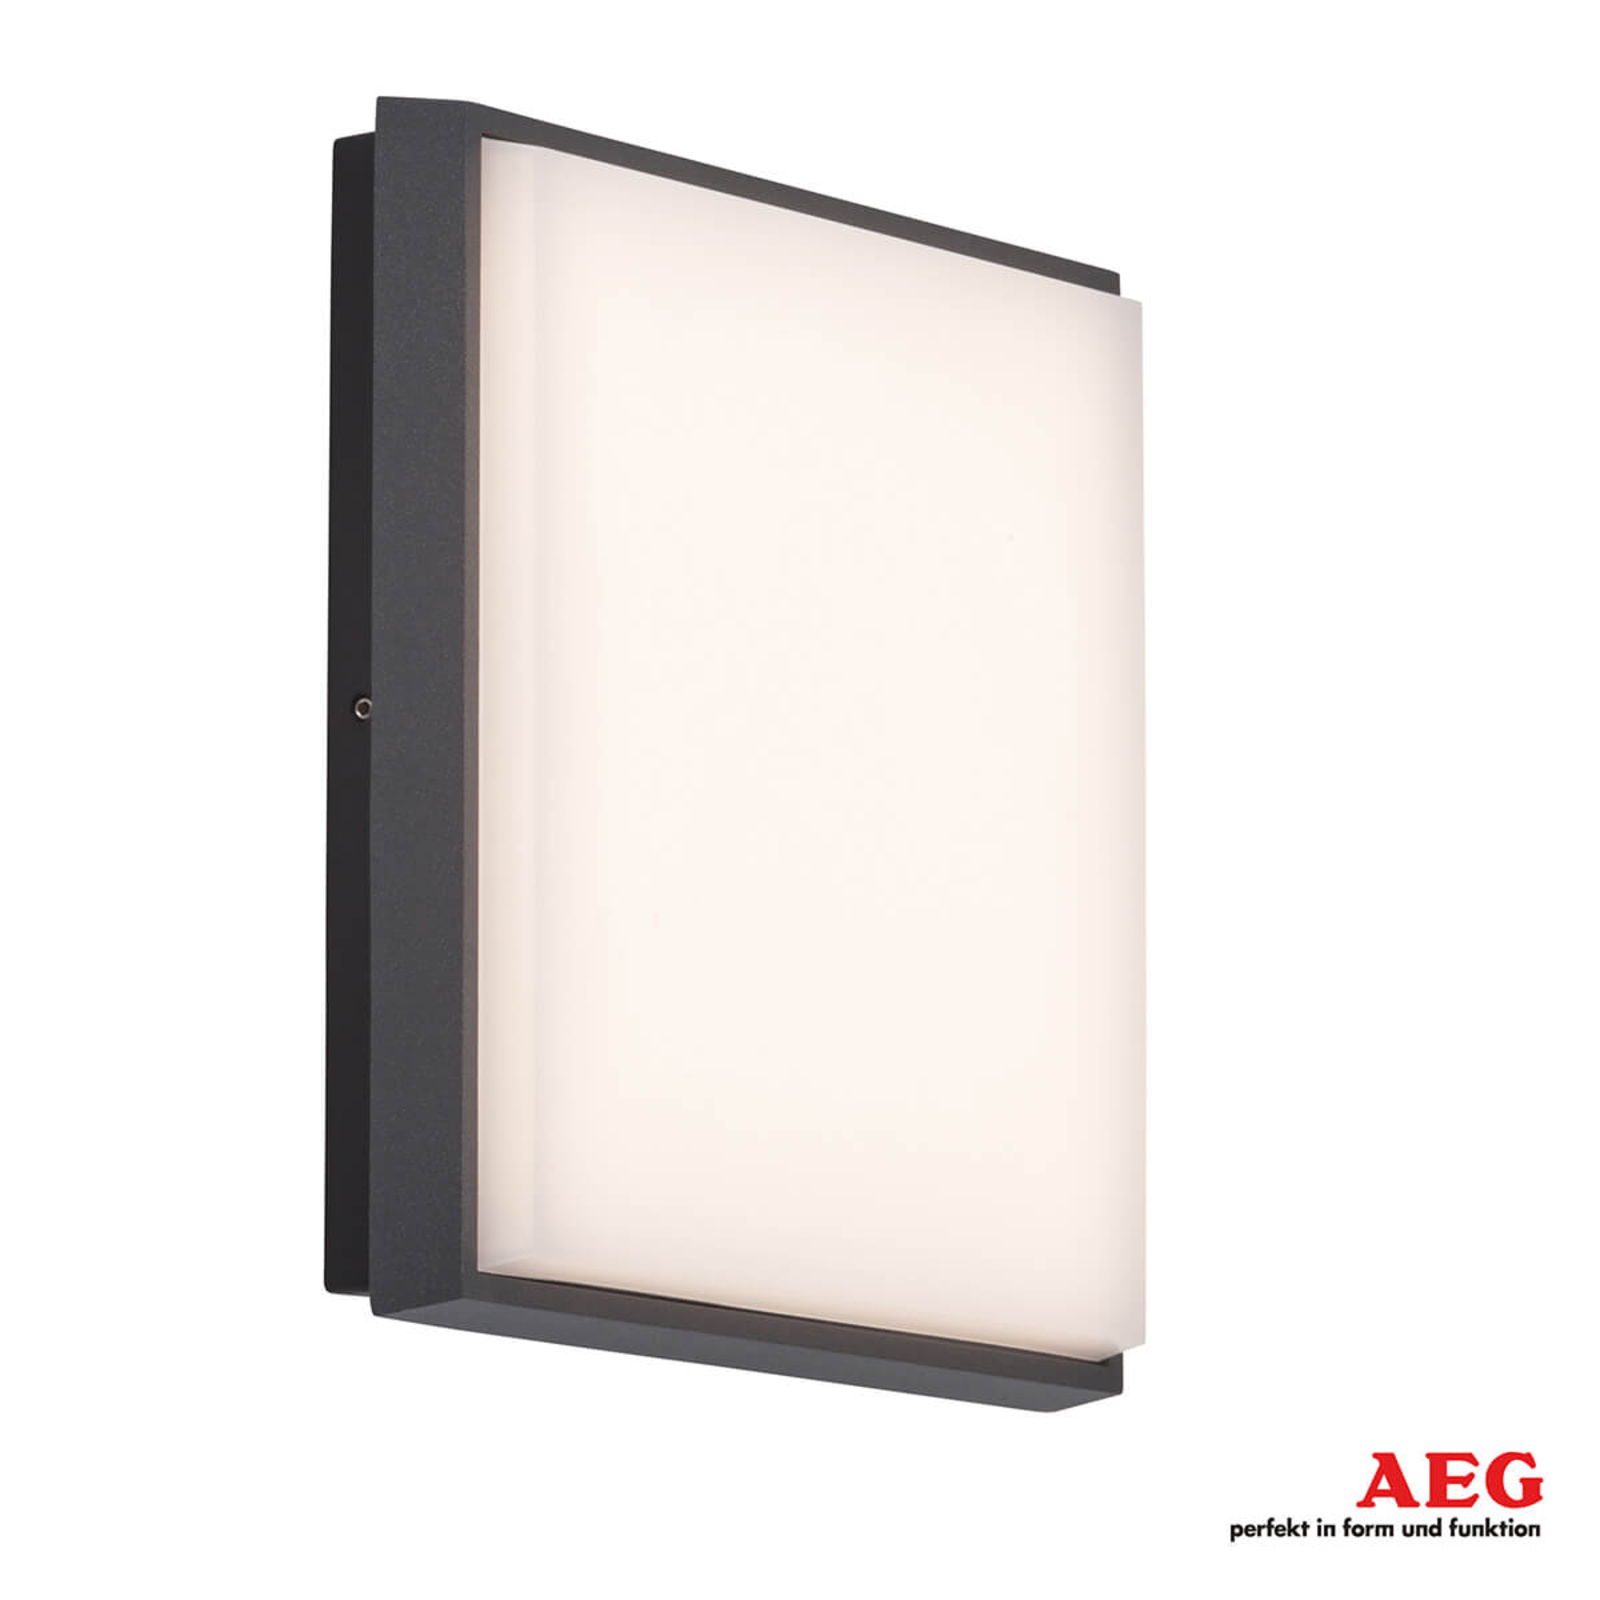 Bright Letan Square LED outdoor wall lamp - 23 W